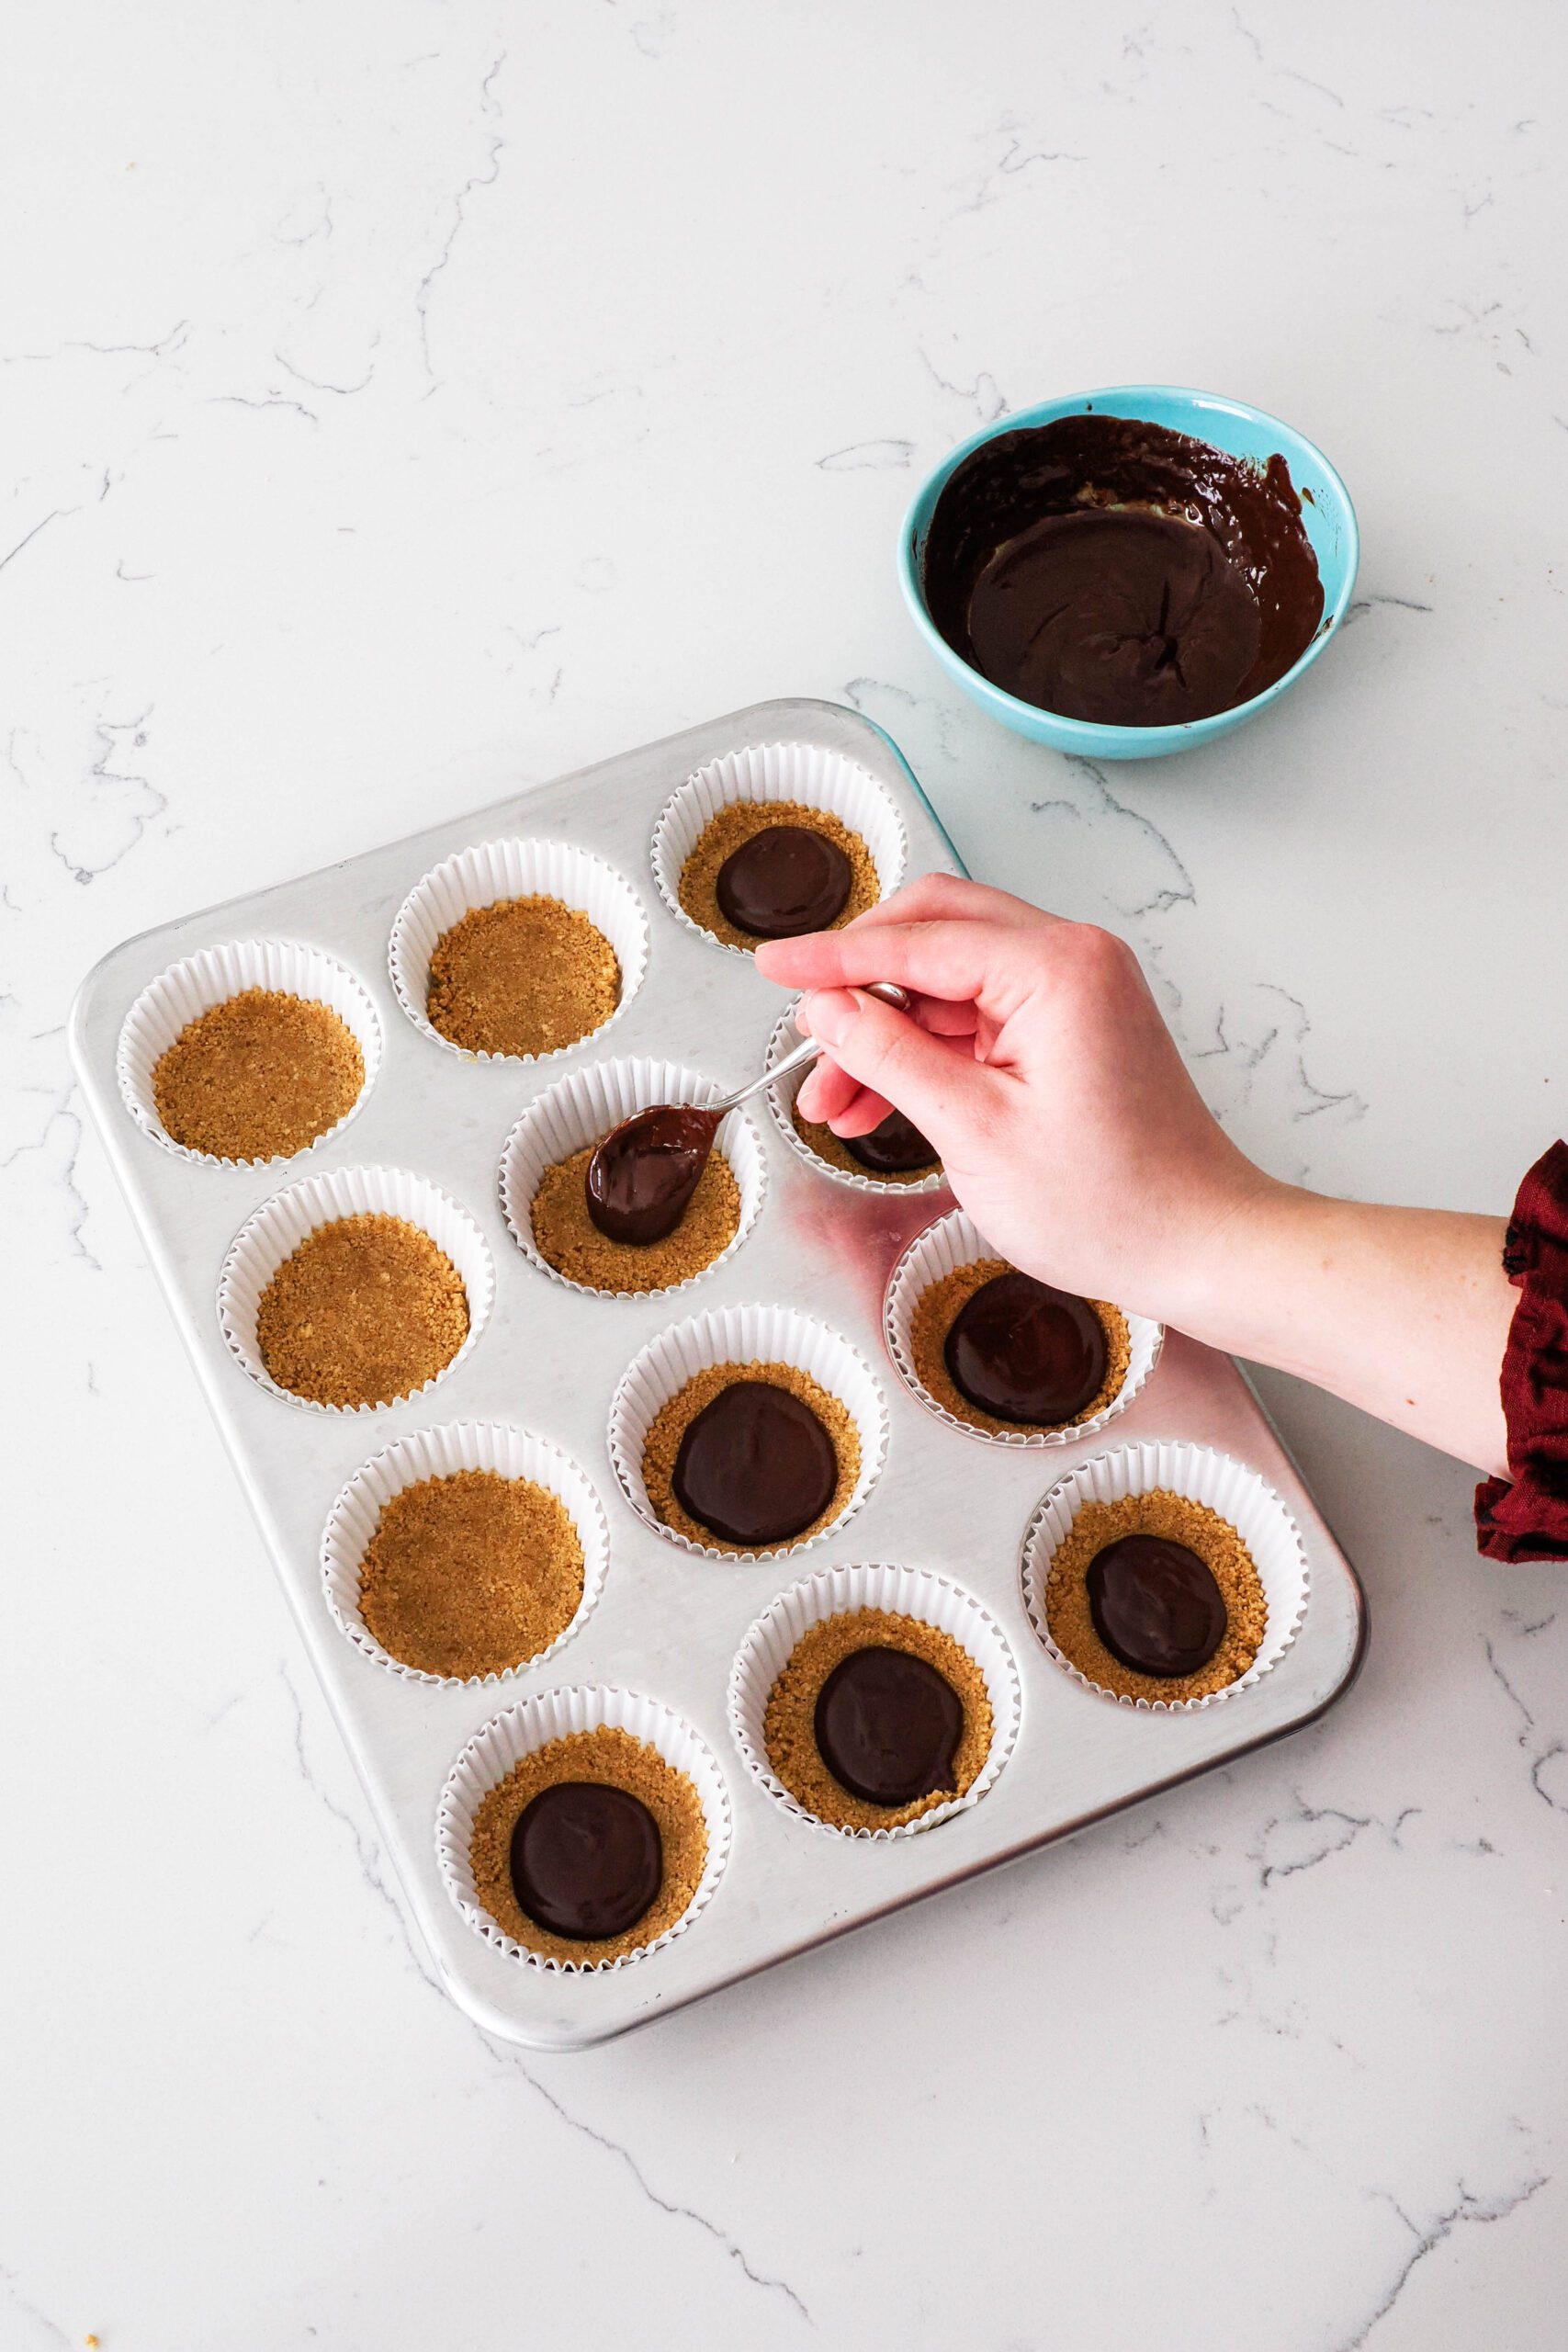 A hand adds a teaspoon of ganache on top of graham cracker crusts in paper muffin liners.